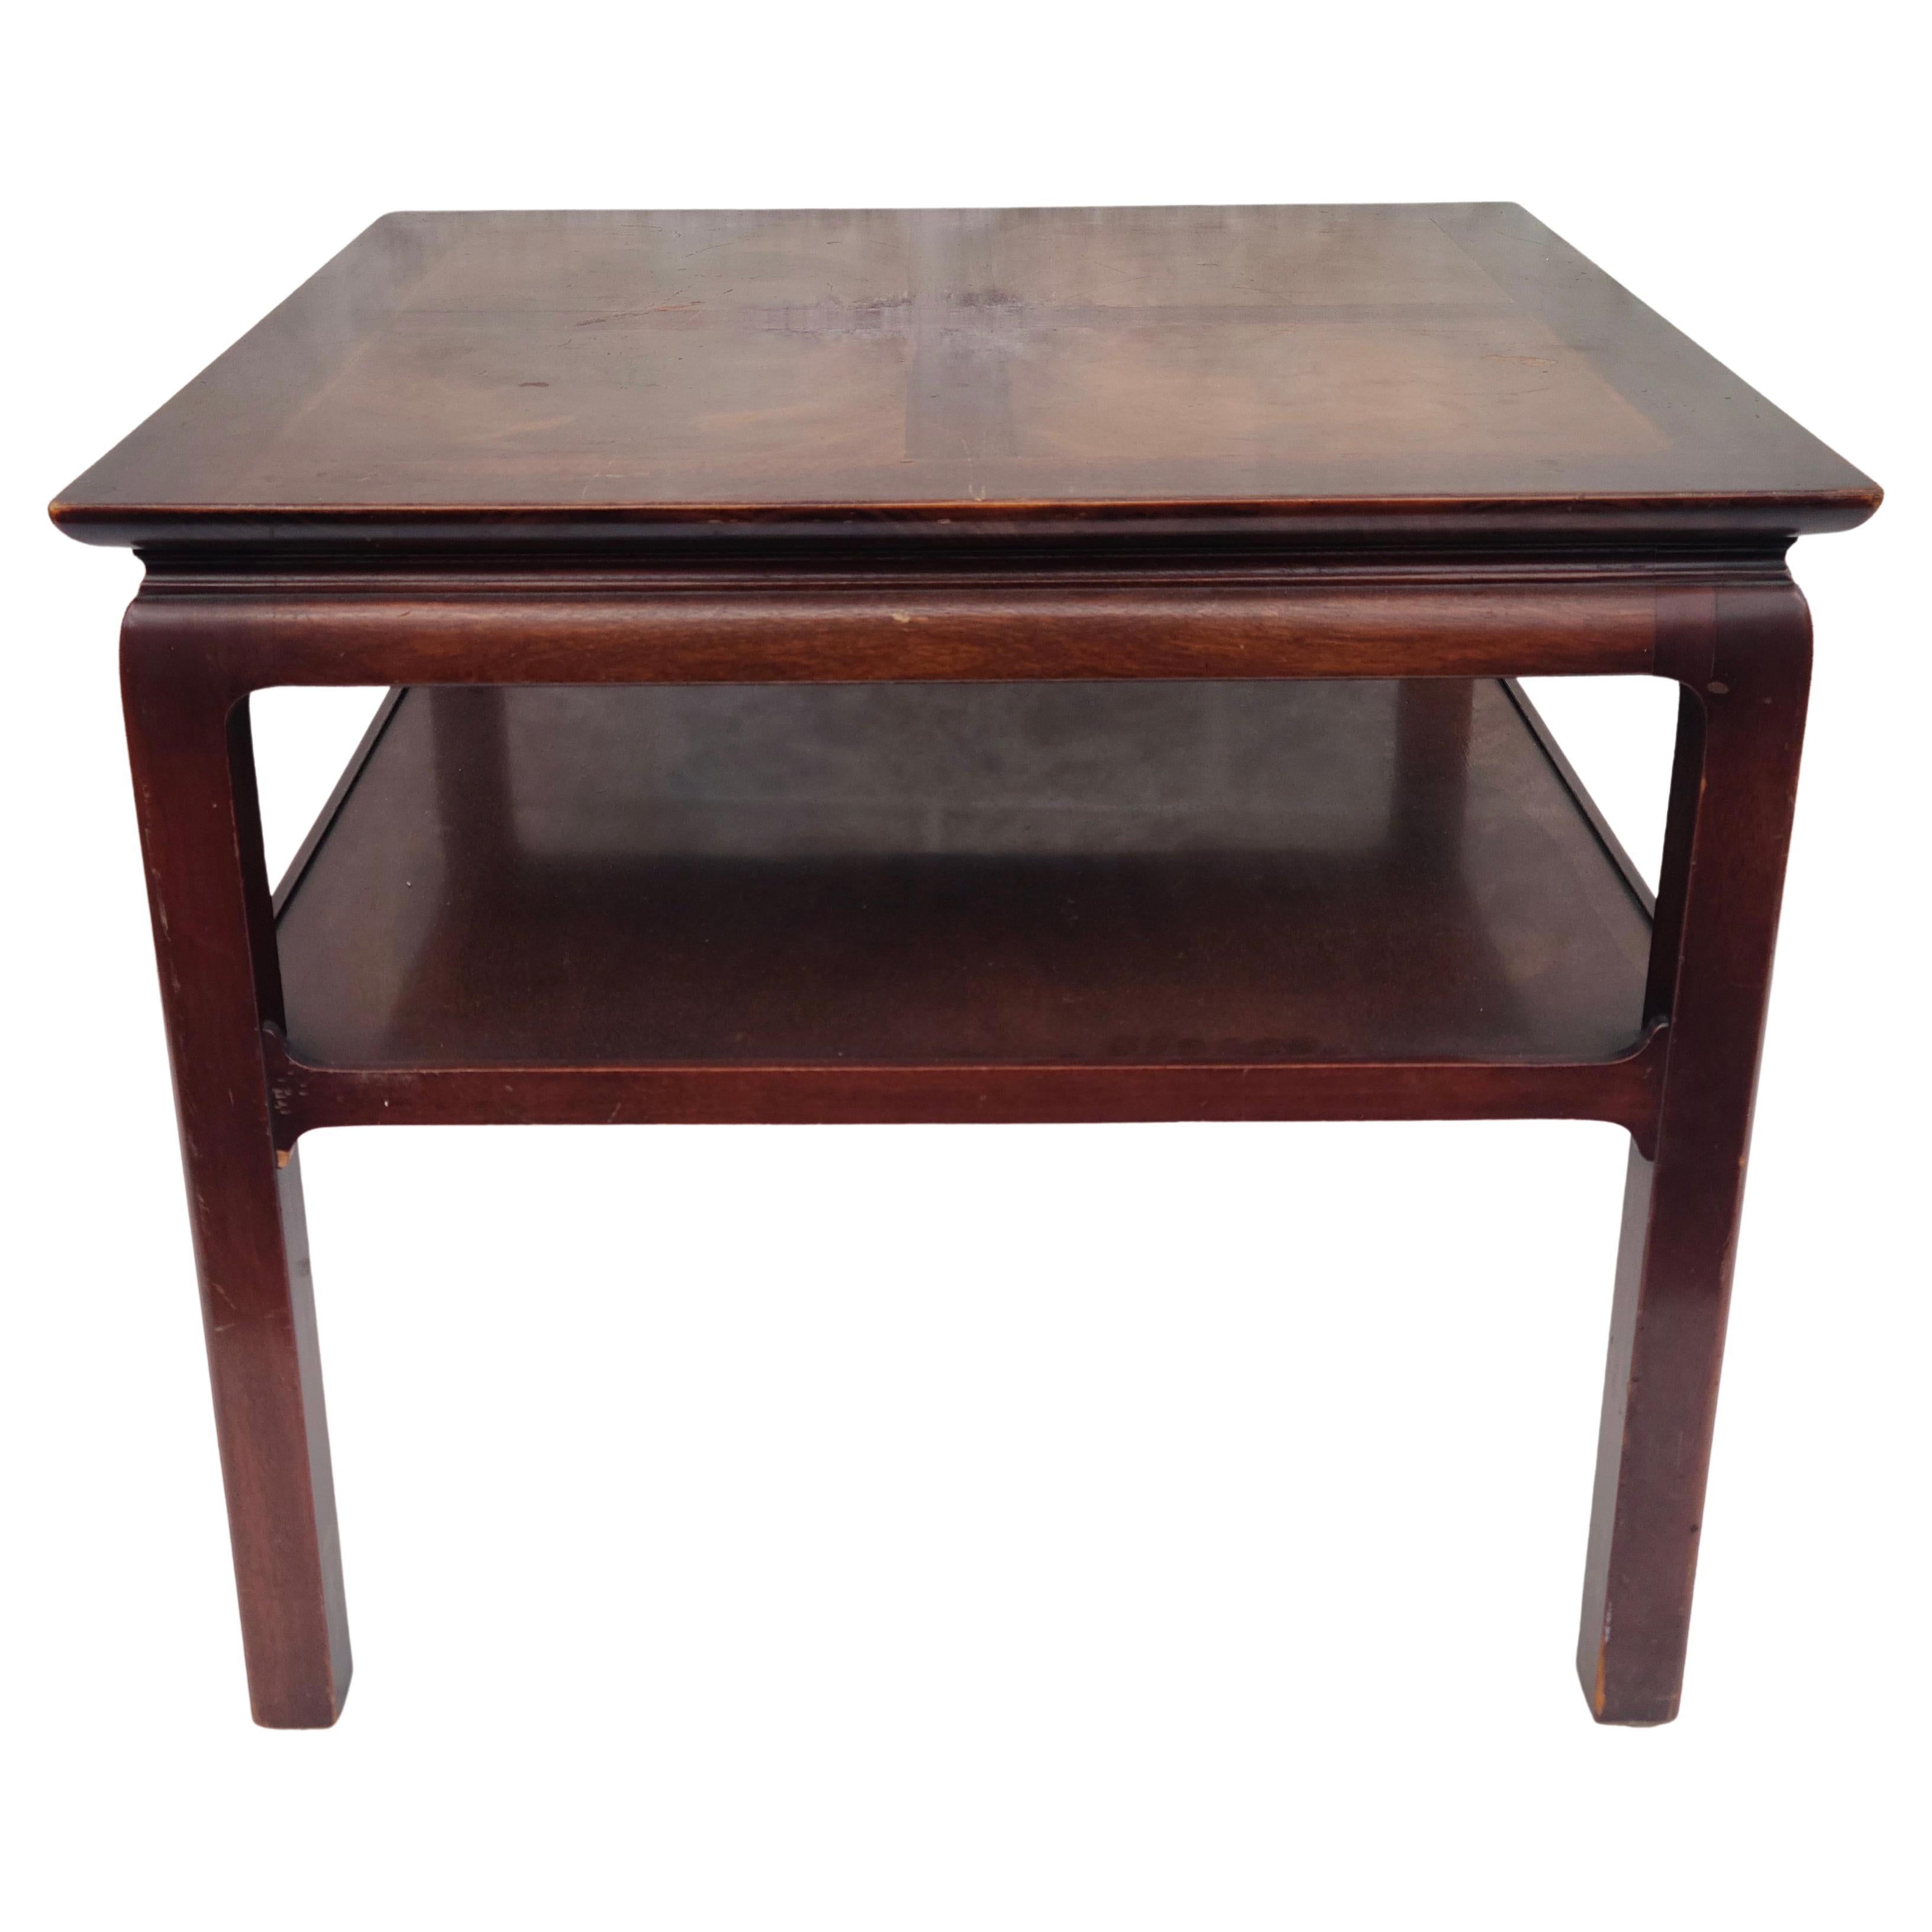 Decorative Modern Sofa Table by Heritage Hendredon For Sale 2